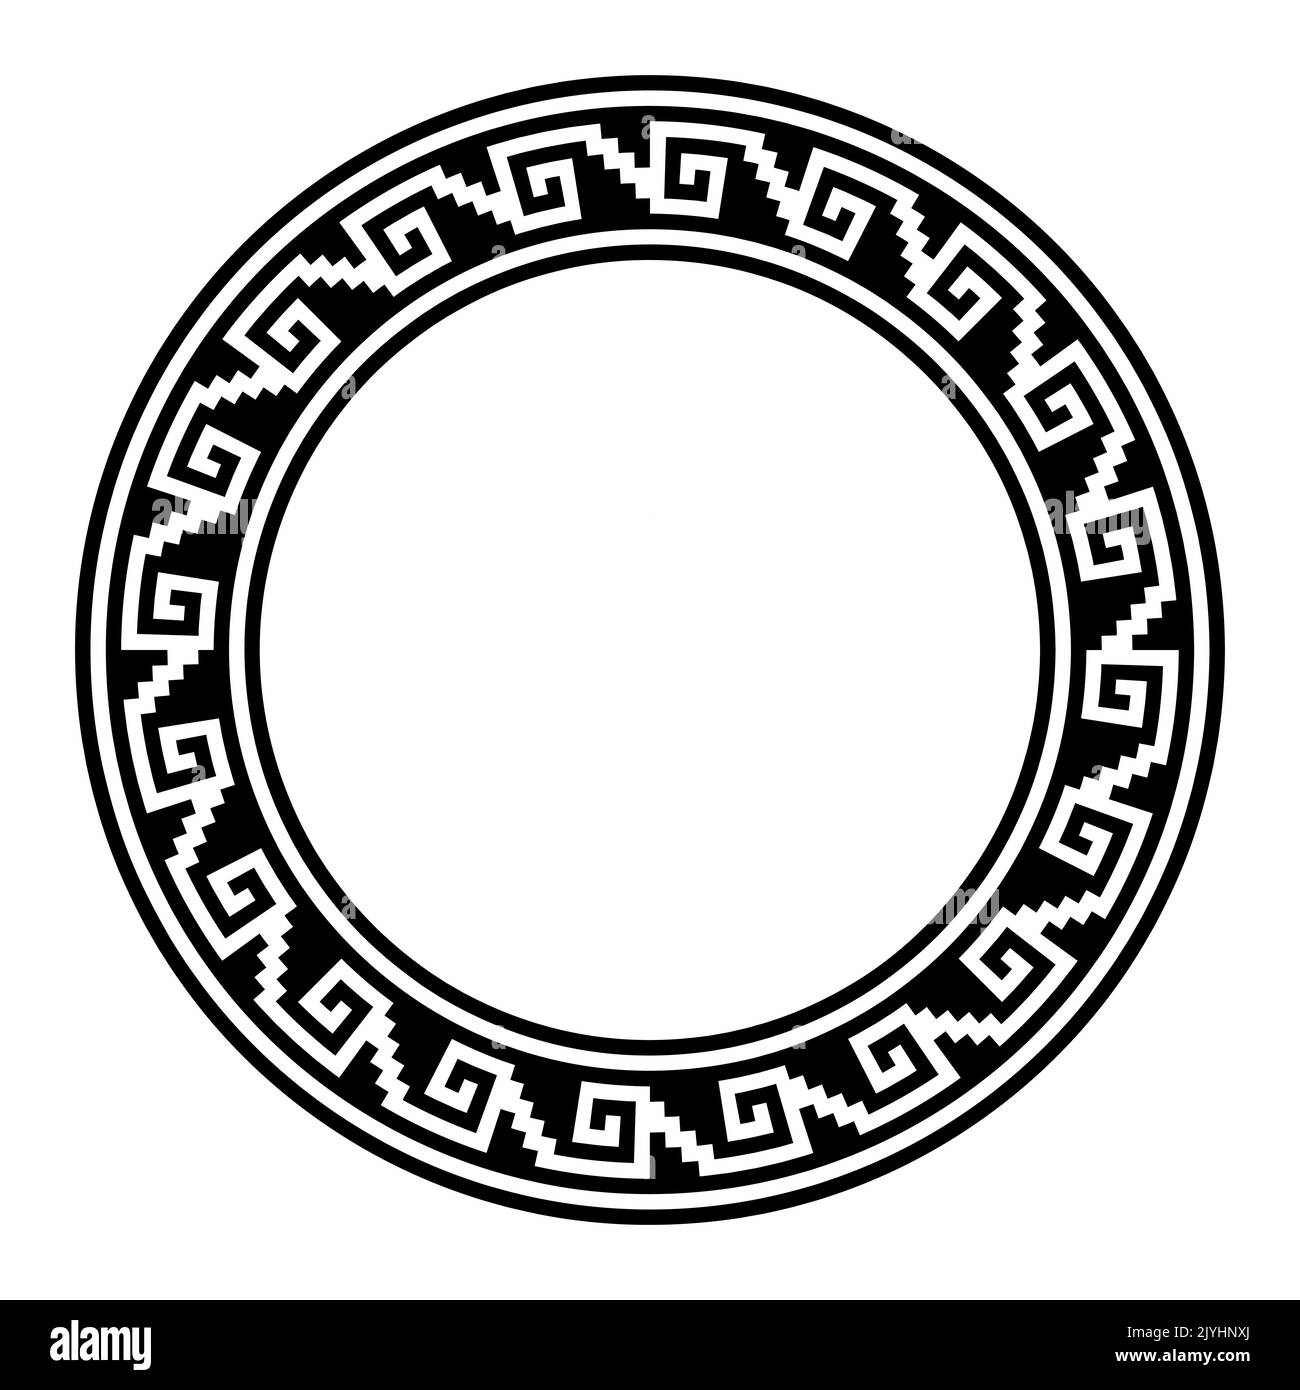 Aztec stepped fret motif, circle frame with meander pattern. Border made of steps, seamless connected to a hook or spiral, similar to Greek key. Stock Photo